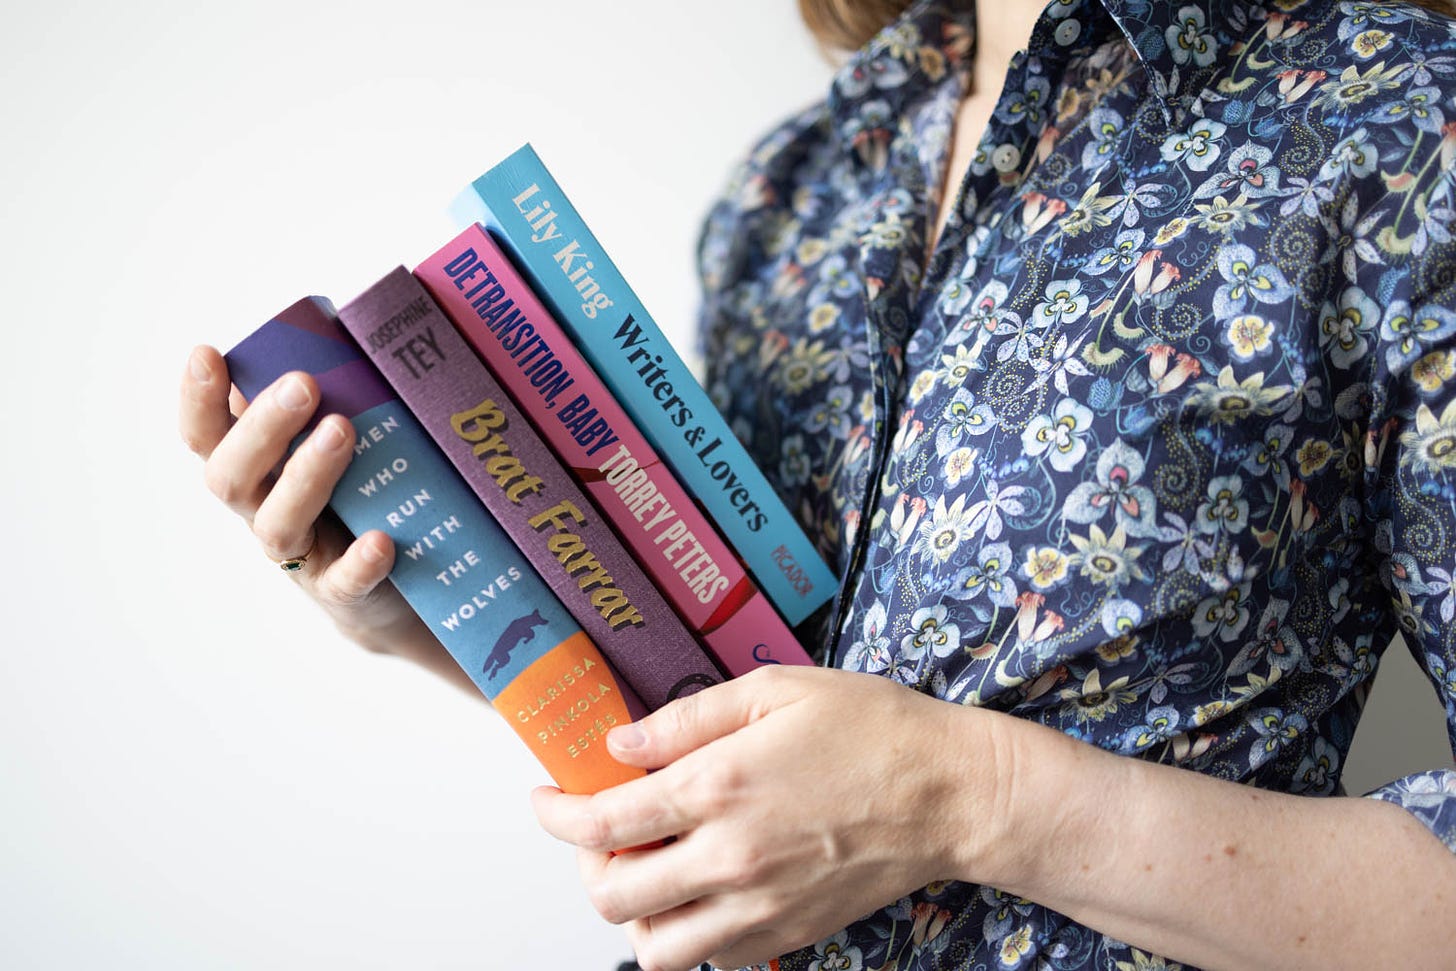 White woman in blue floral blouse holds a stack of books: Women who run with the wolves, Brat Farrar, Detransition Baby and Writers & Lovers